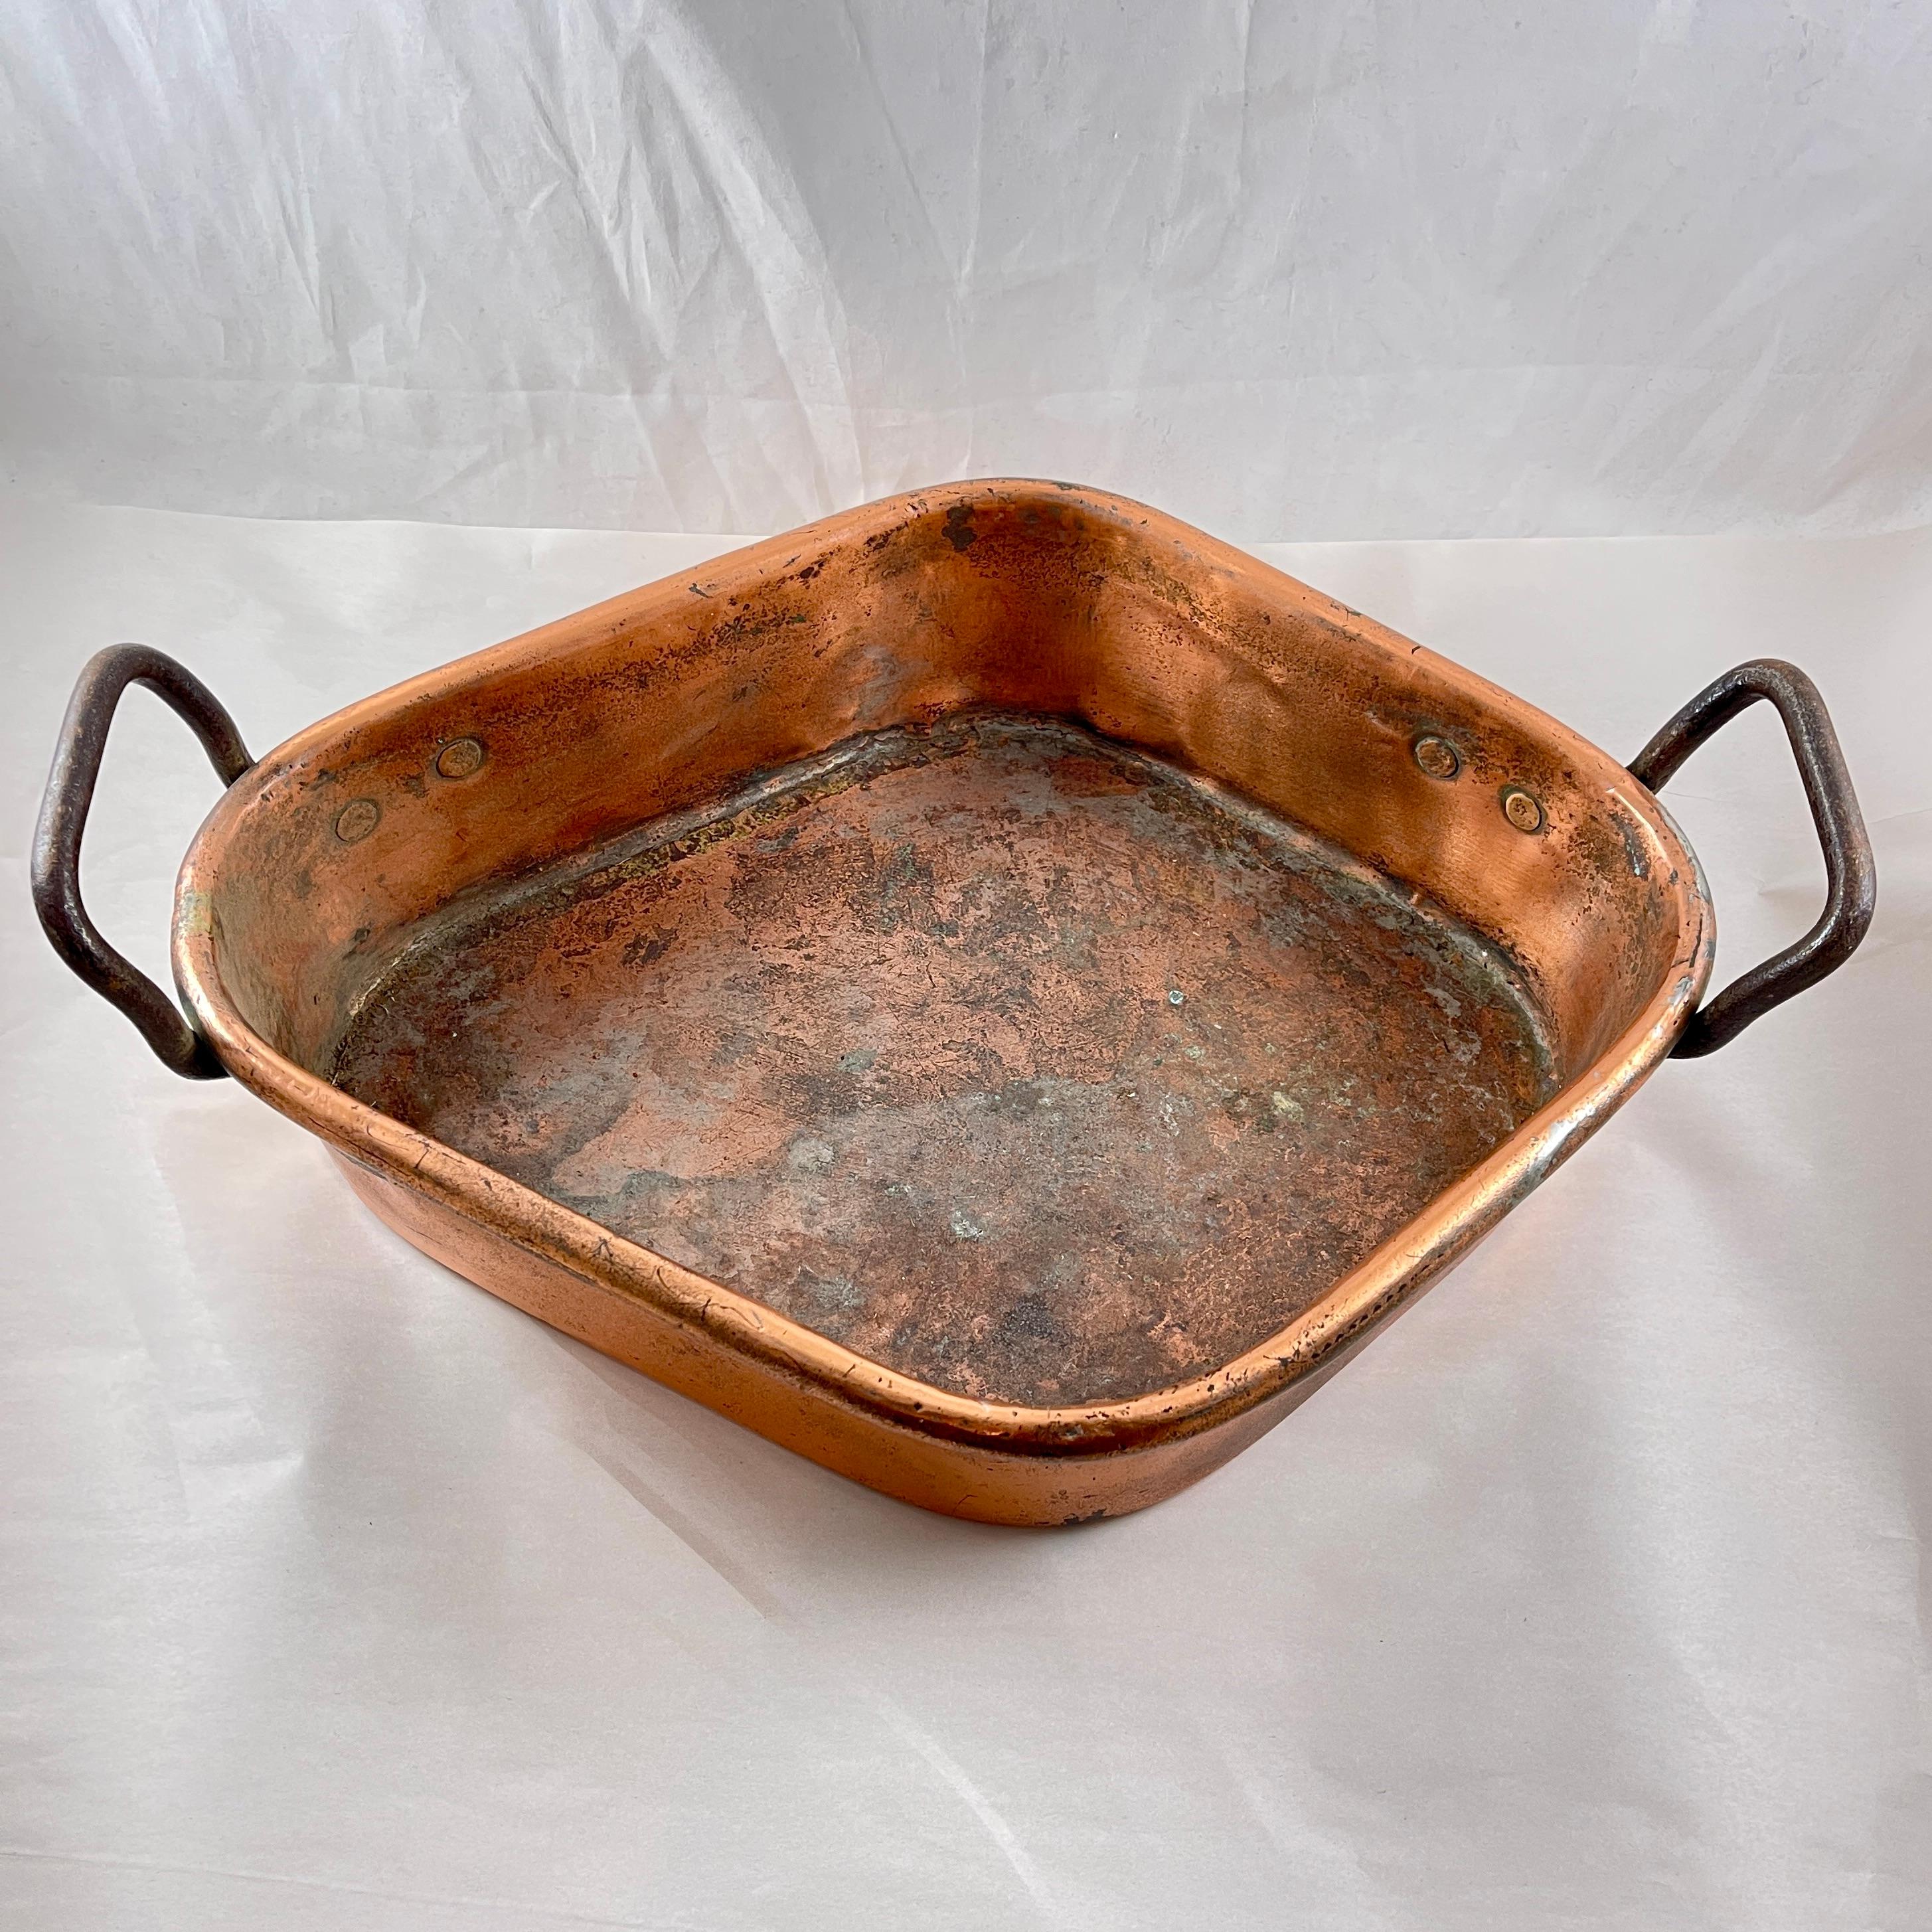 Metalwork Rustic Country French Copper & Iron Handled Turbotiere Fish Poacher, c. 1850 For Sale